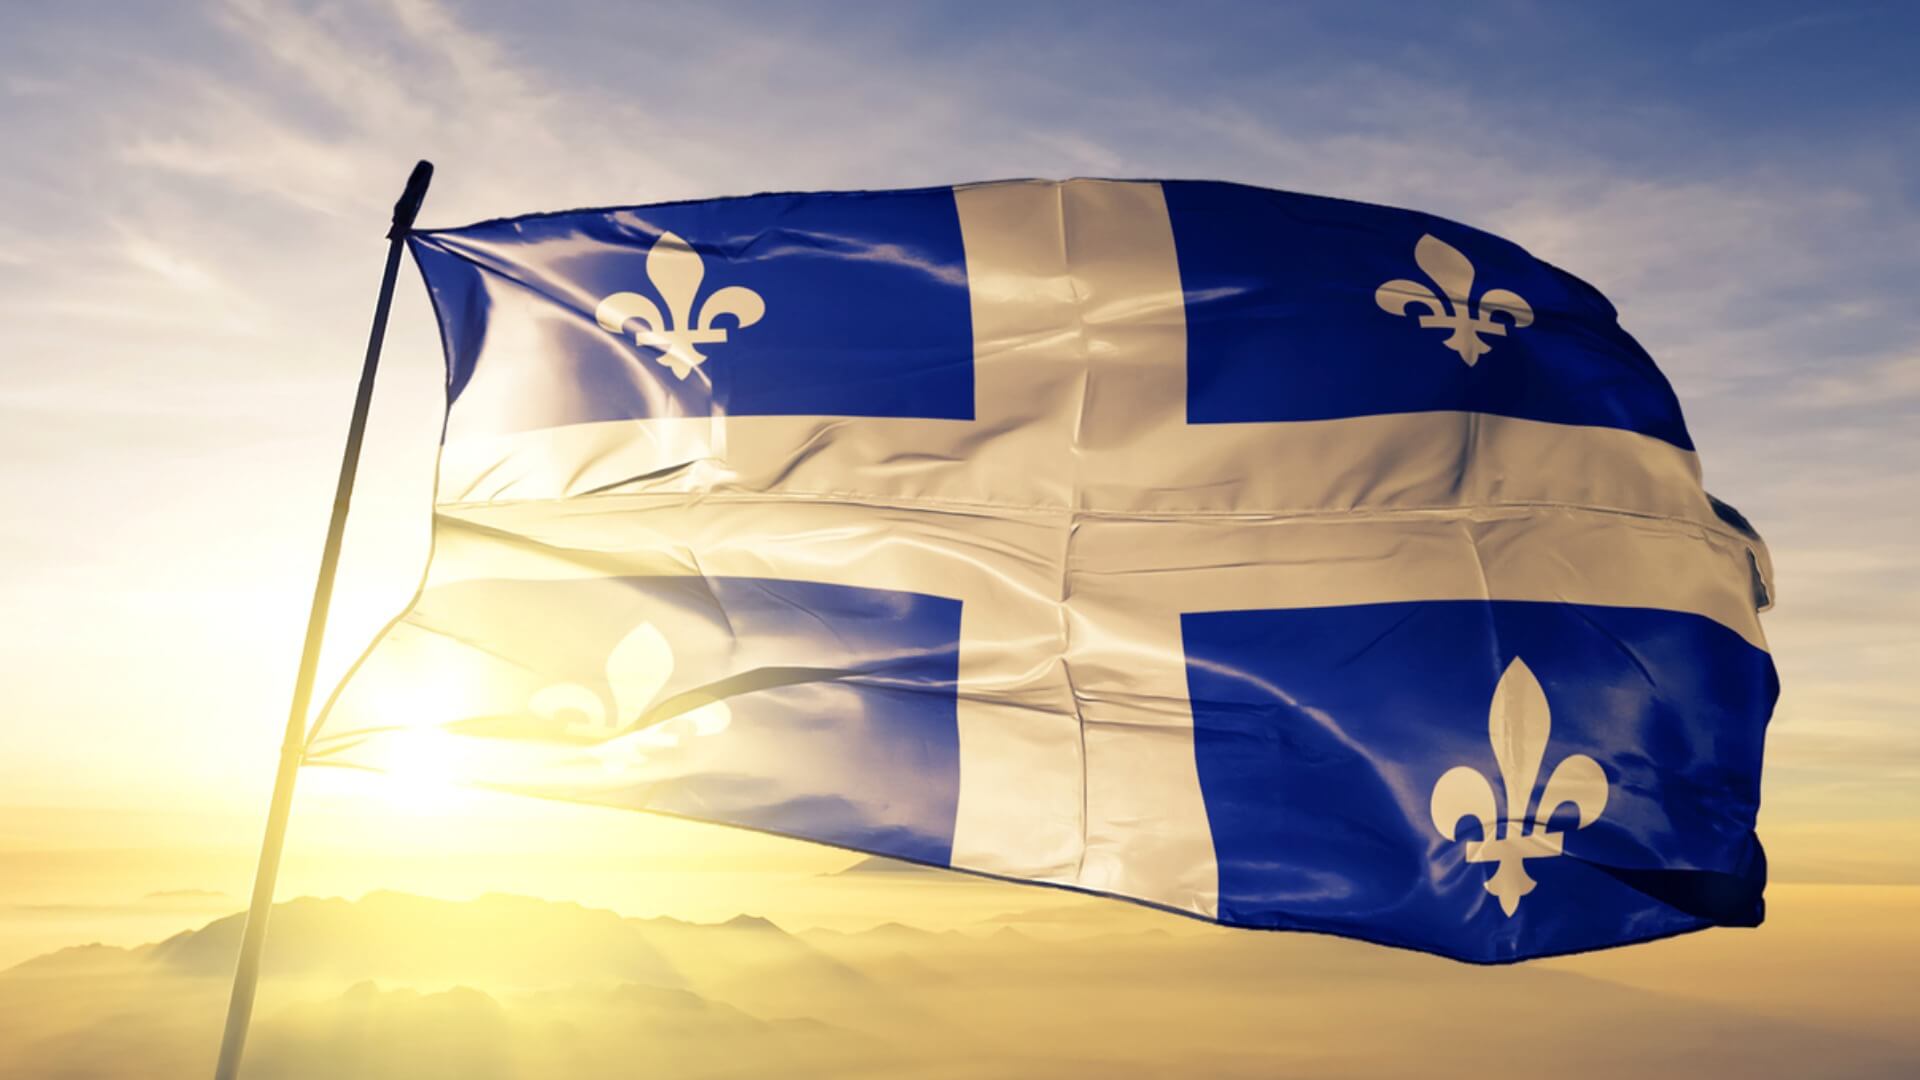 Quebec flag blowing in the wind.